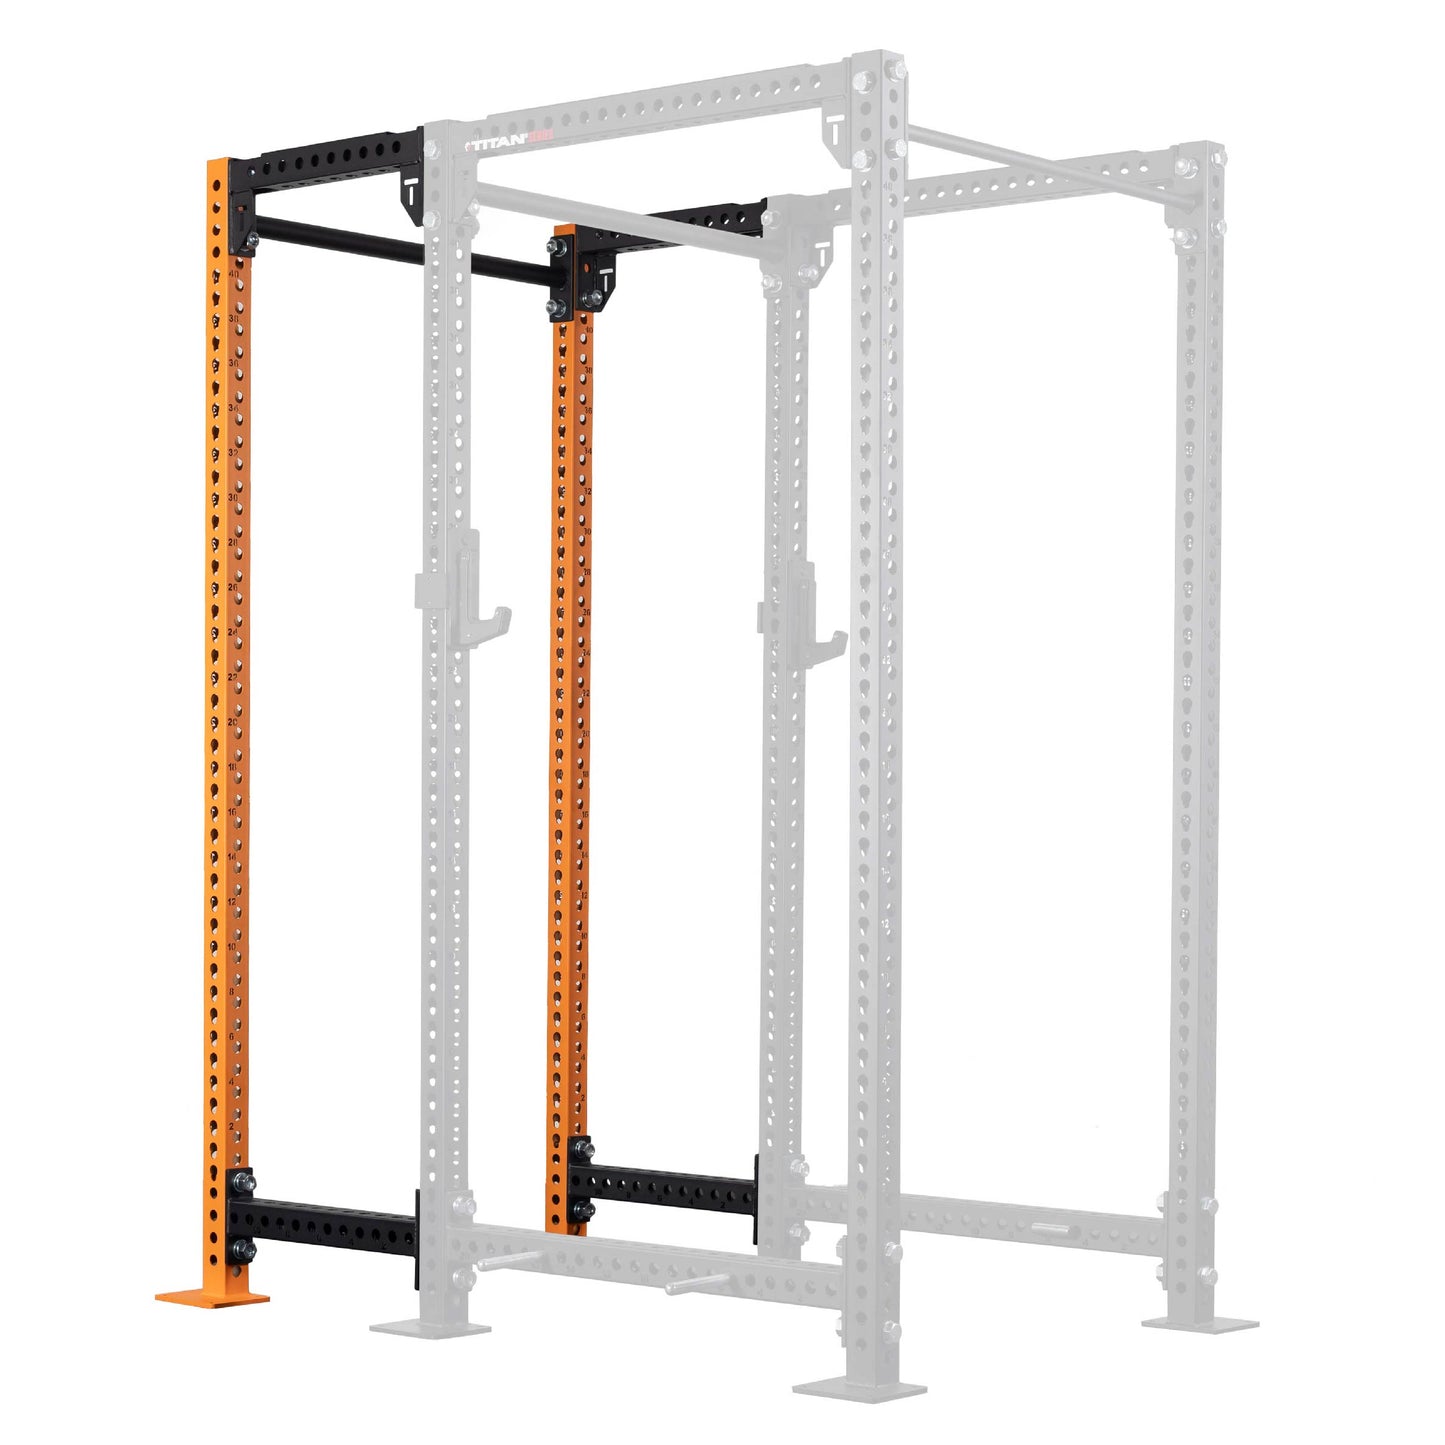 TITAN Series 24" Extension Kit - Extension Color: Orange - Extension Height: 100" - Crossmember: 2" Fat Pull-Up Bar | Orange / 100" / 2" Fat Pull-Up Bar - view 110